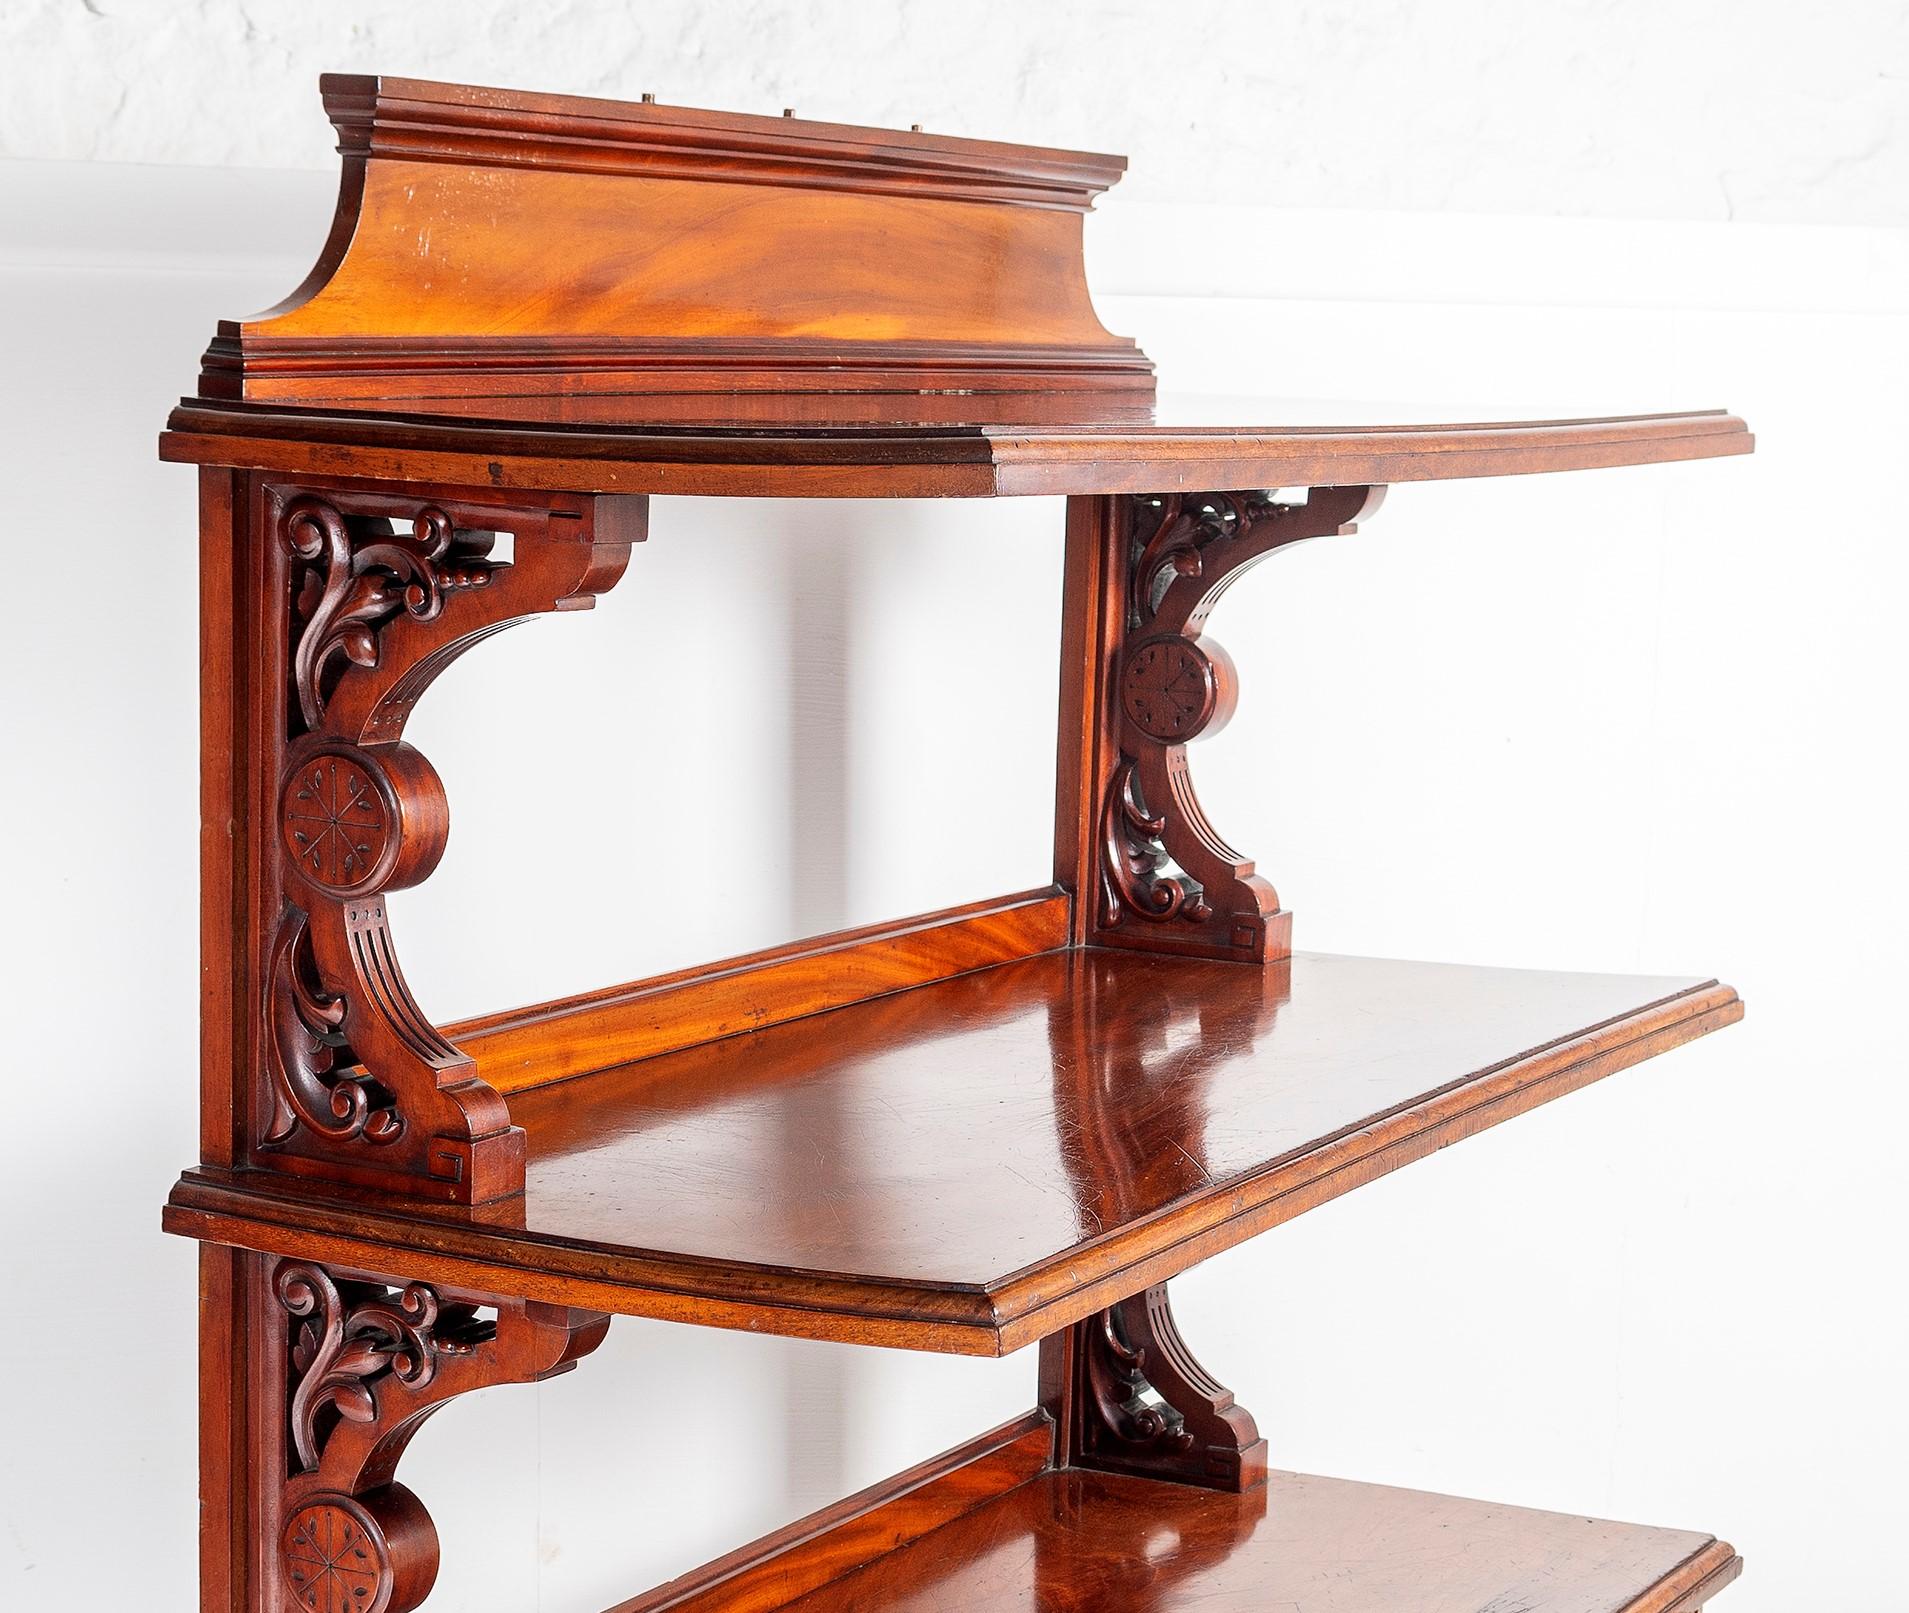 A Victorian Mahogany three tier Buffet Table, English circa. 1860, having three rectangular shelves supported on scroll carved brackets. The lower shelf fitted with two frieze drawers, all raised on inverted baluster legs with its original brown pot